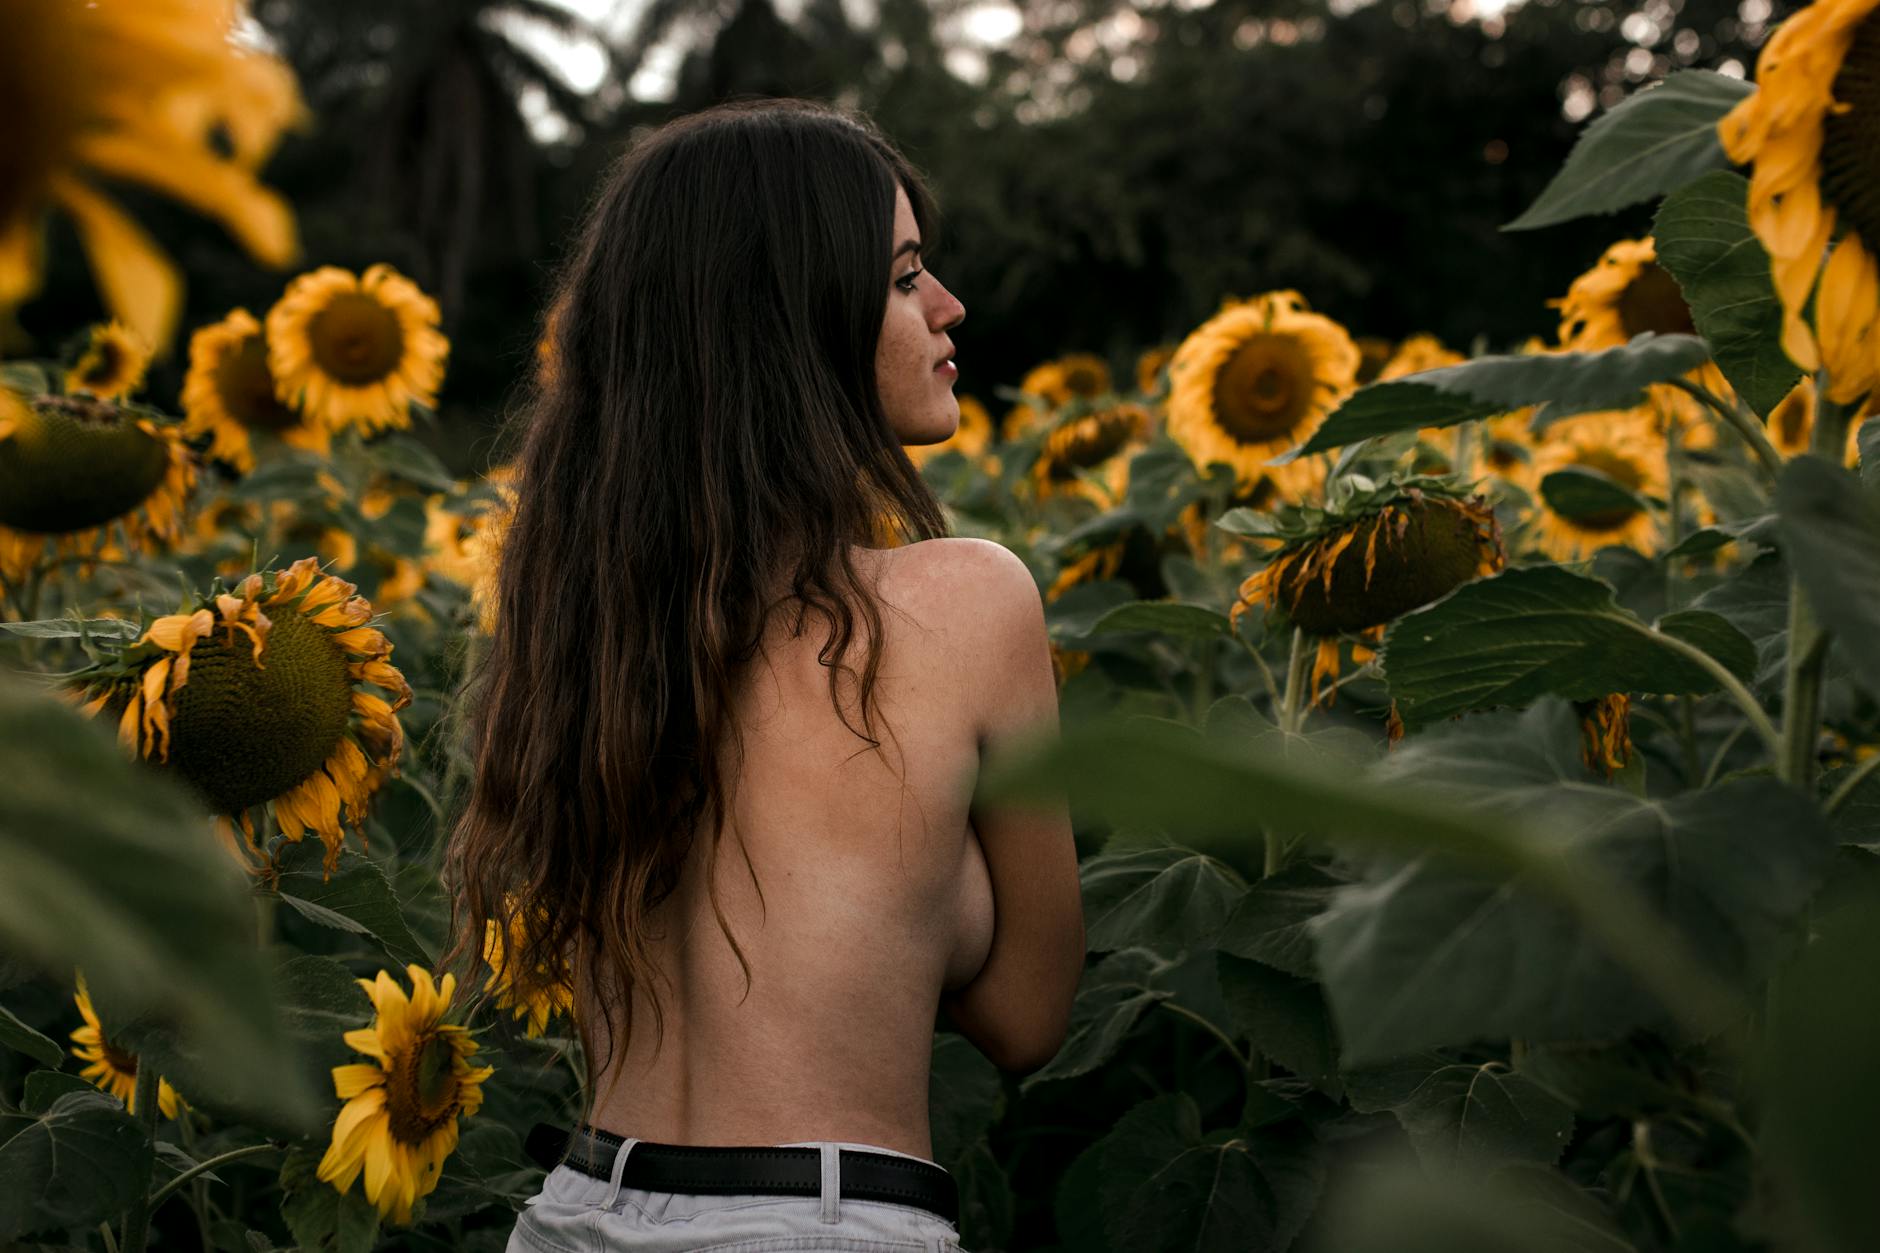 Shirtless woman surrounded by sunflowers